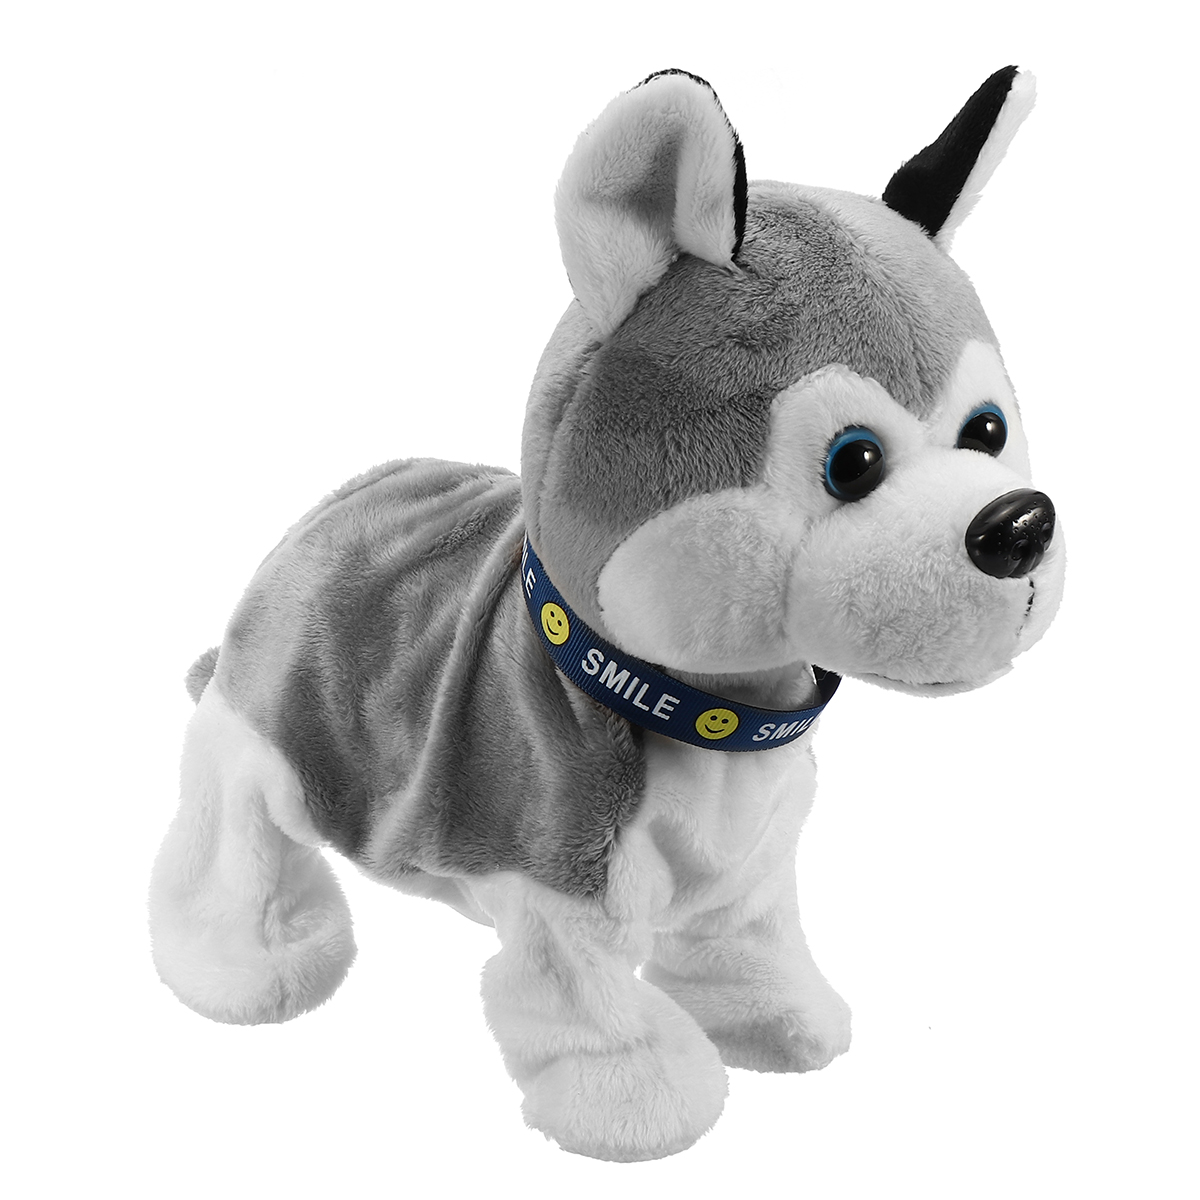 Interactive-Dog-Electronic-Pet-Stuffed-Plush-Toy-Control-Walk-Sound-Husky-Reacts-Touch-1414452-4